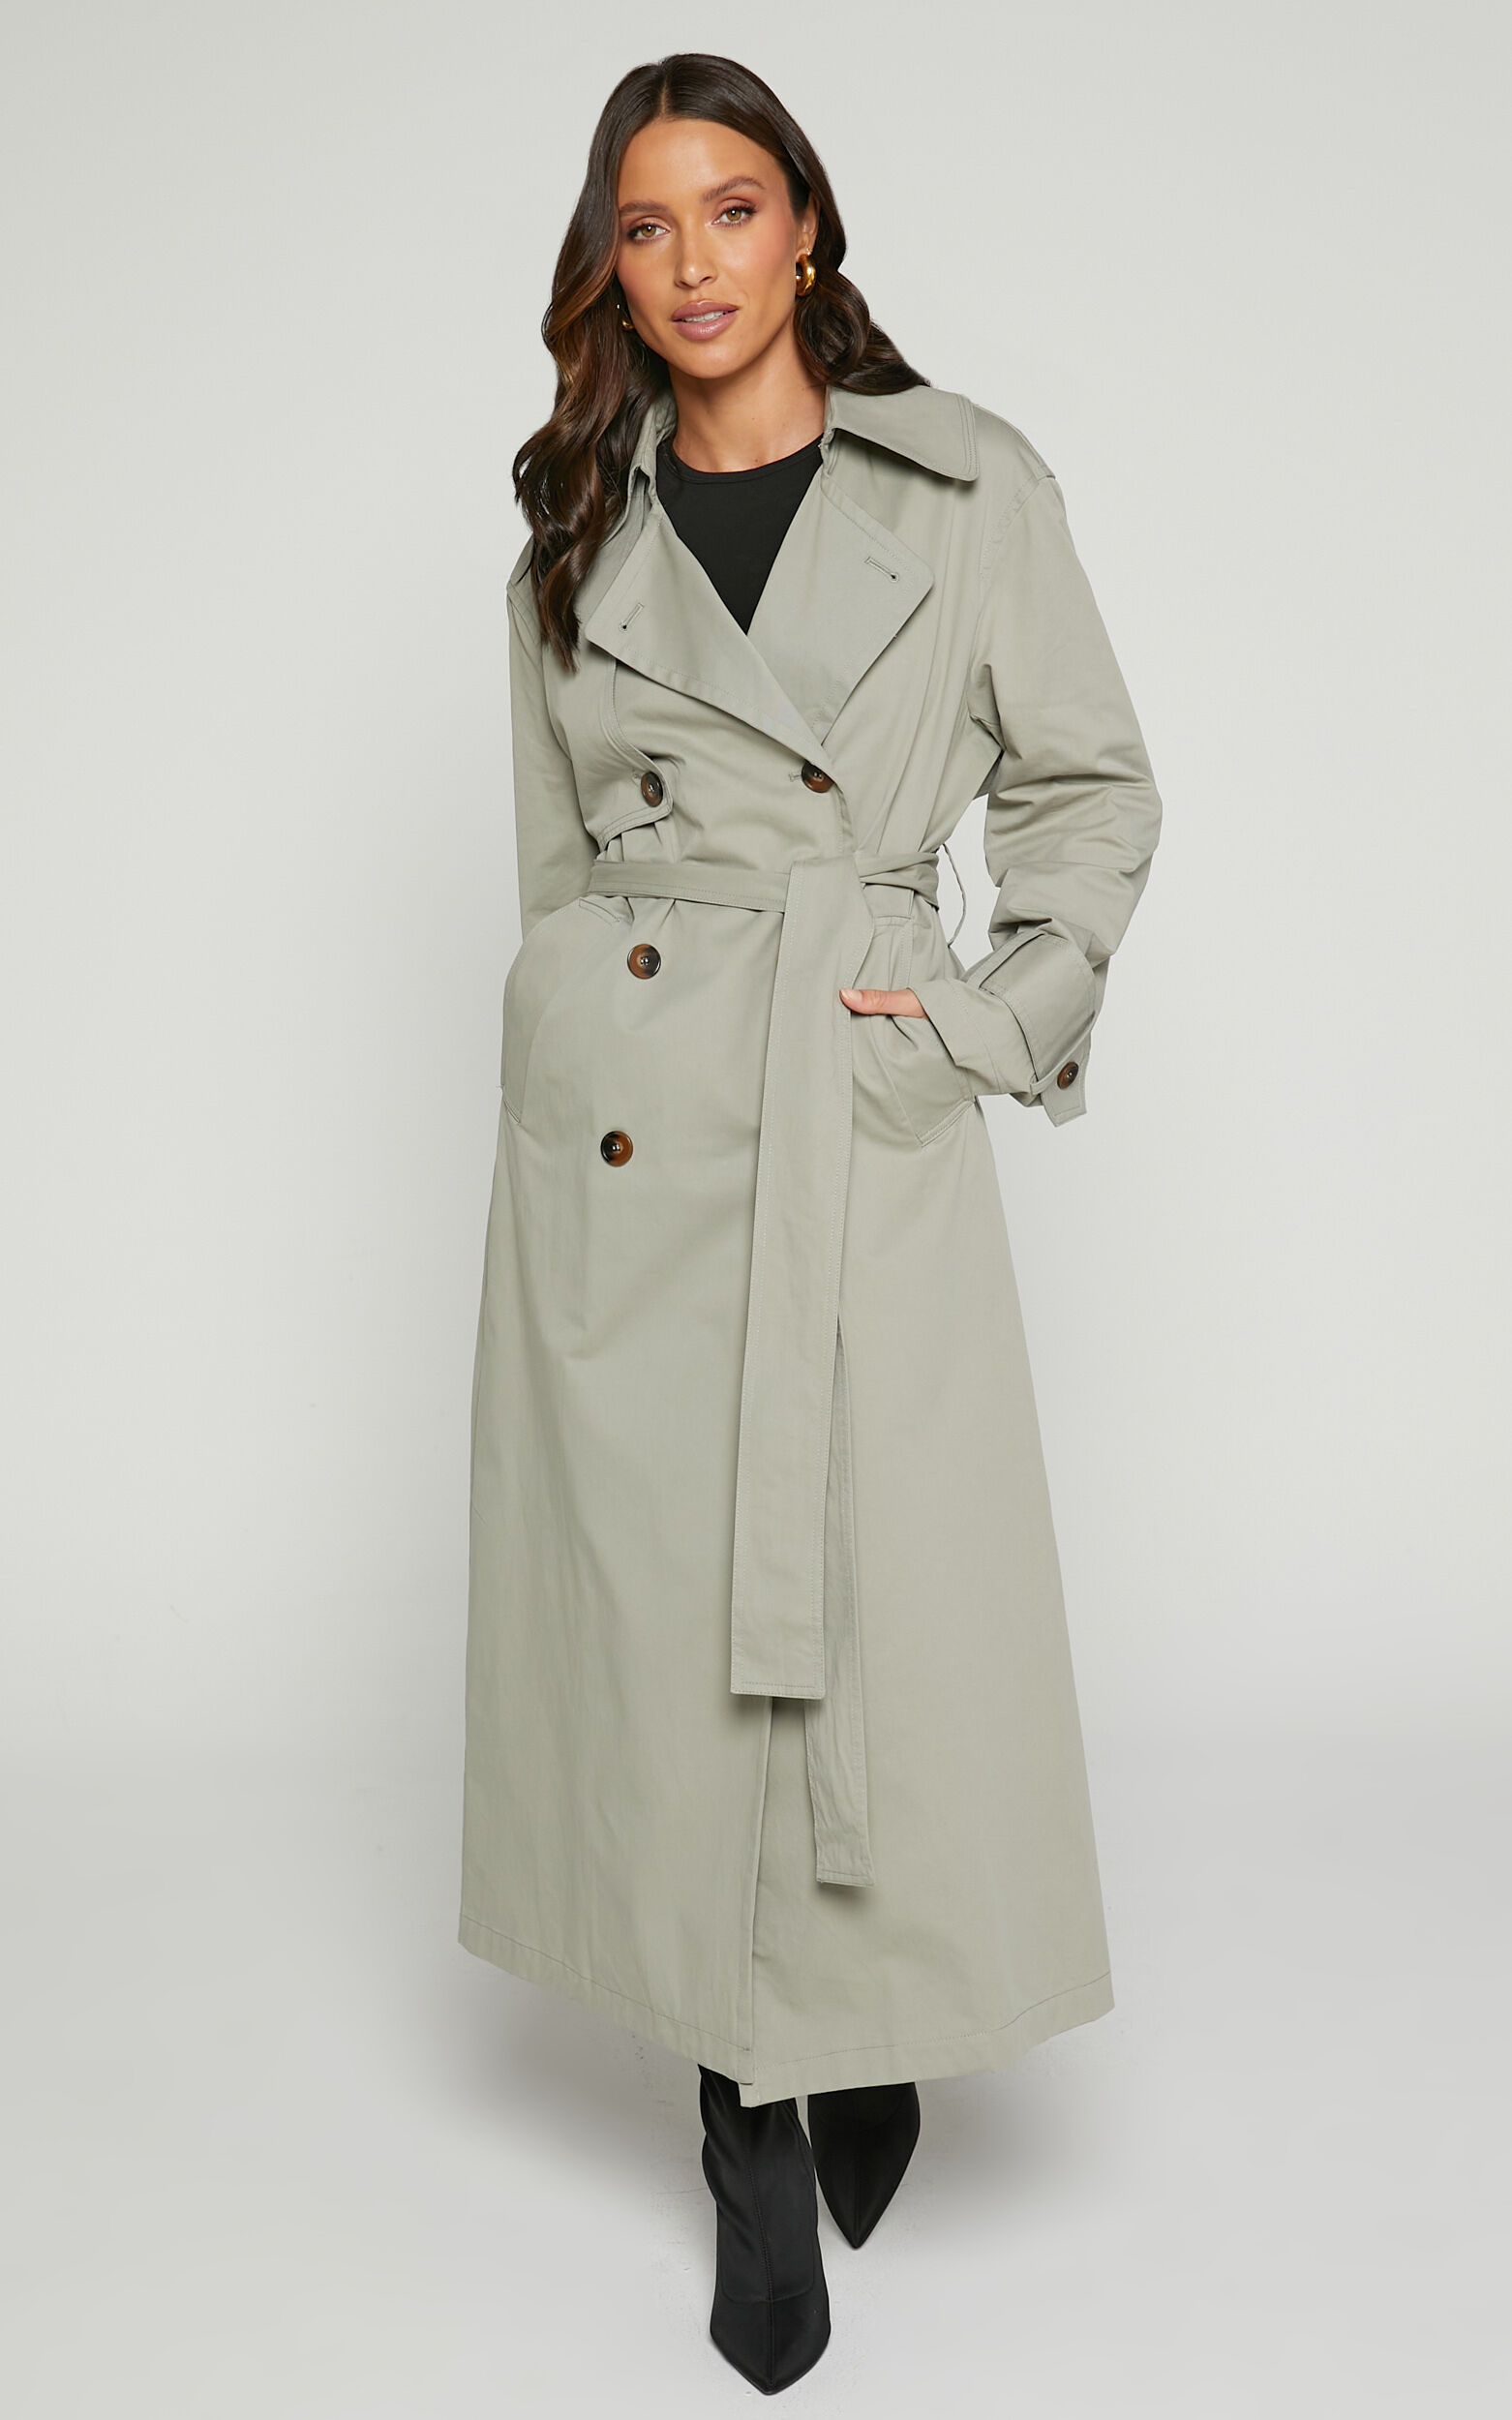 Avah Trench Coat - Double Breasted Tie Waist Coat in Washed Khaki